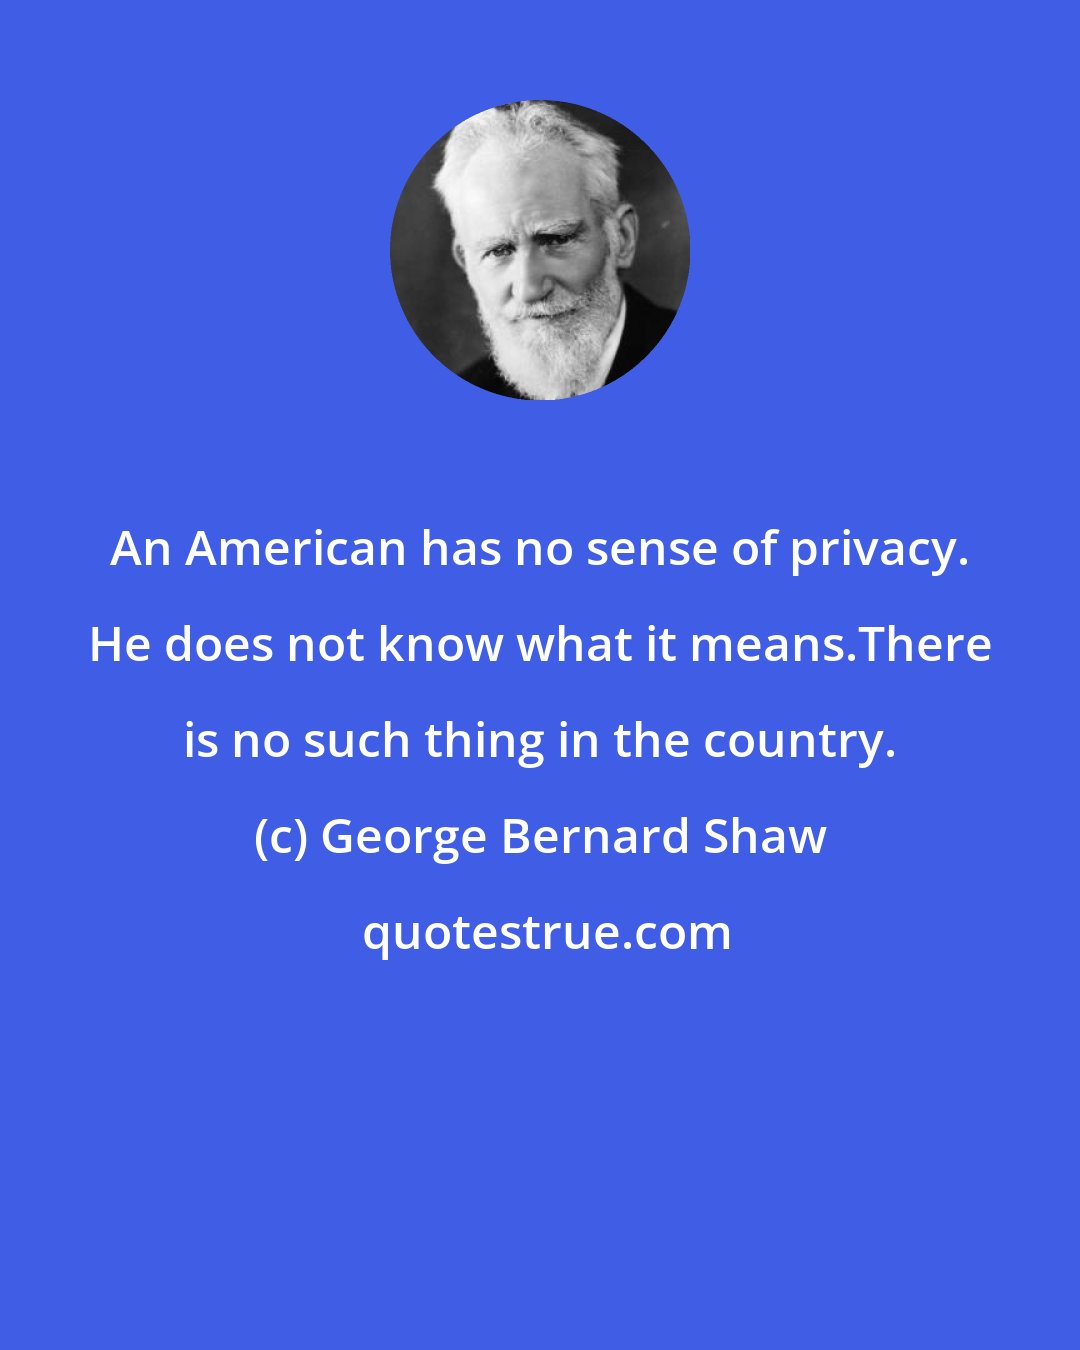 George Bernard Shaw: An American has no sense of privacy. He does not know what it means.There is no such thing in the country.